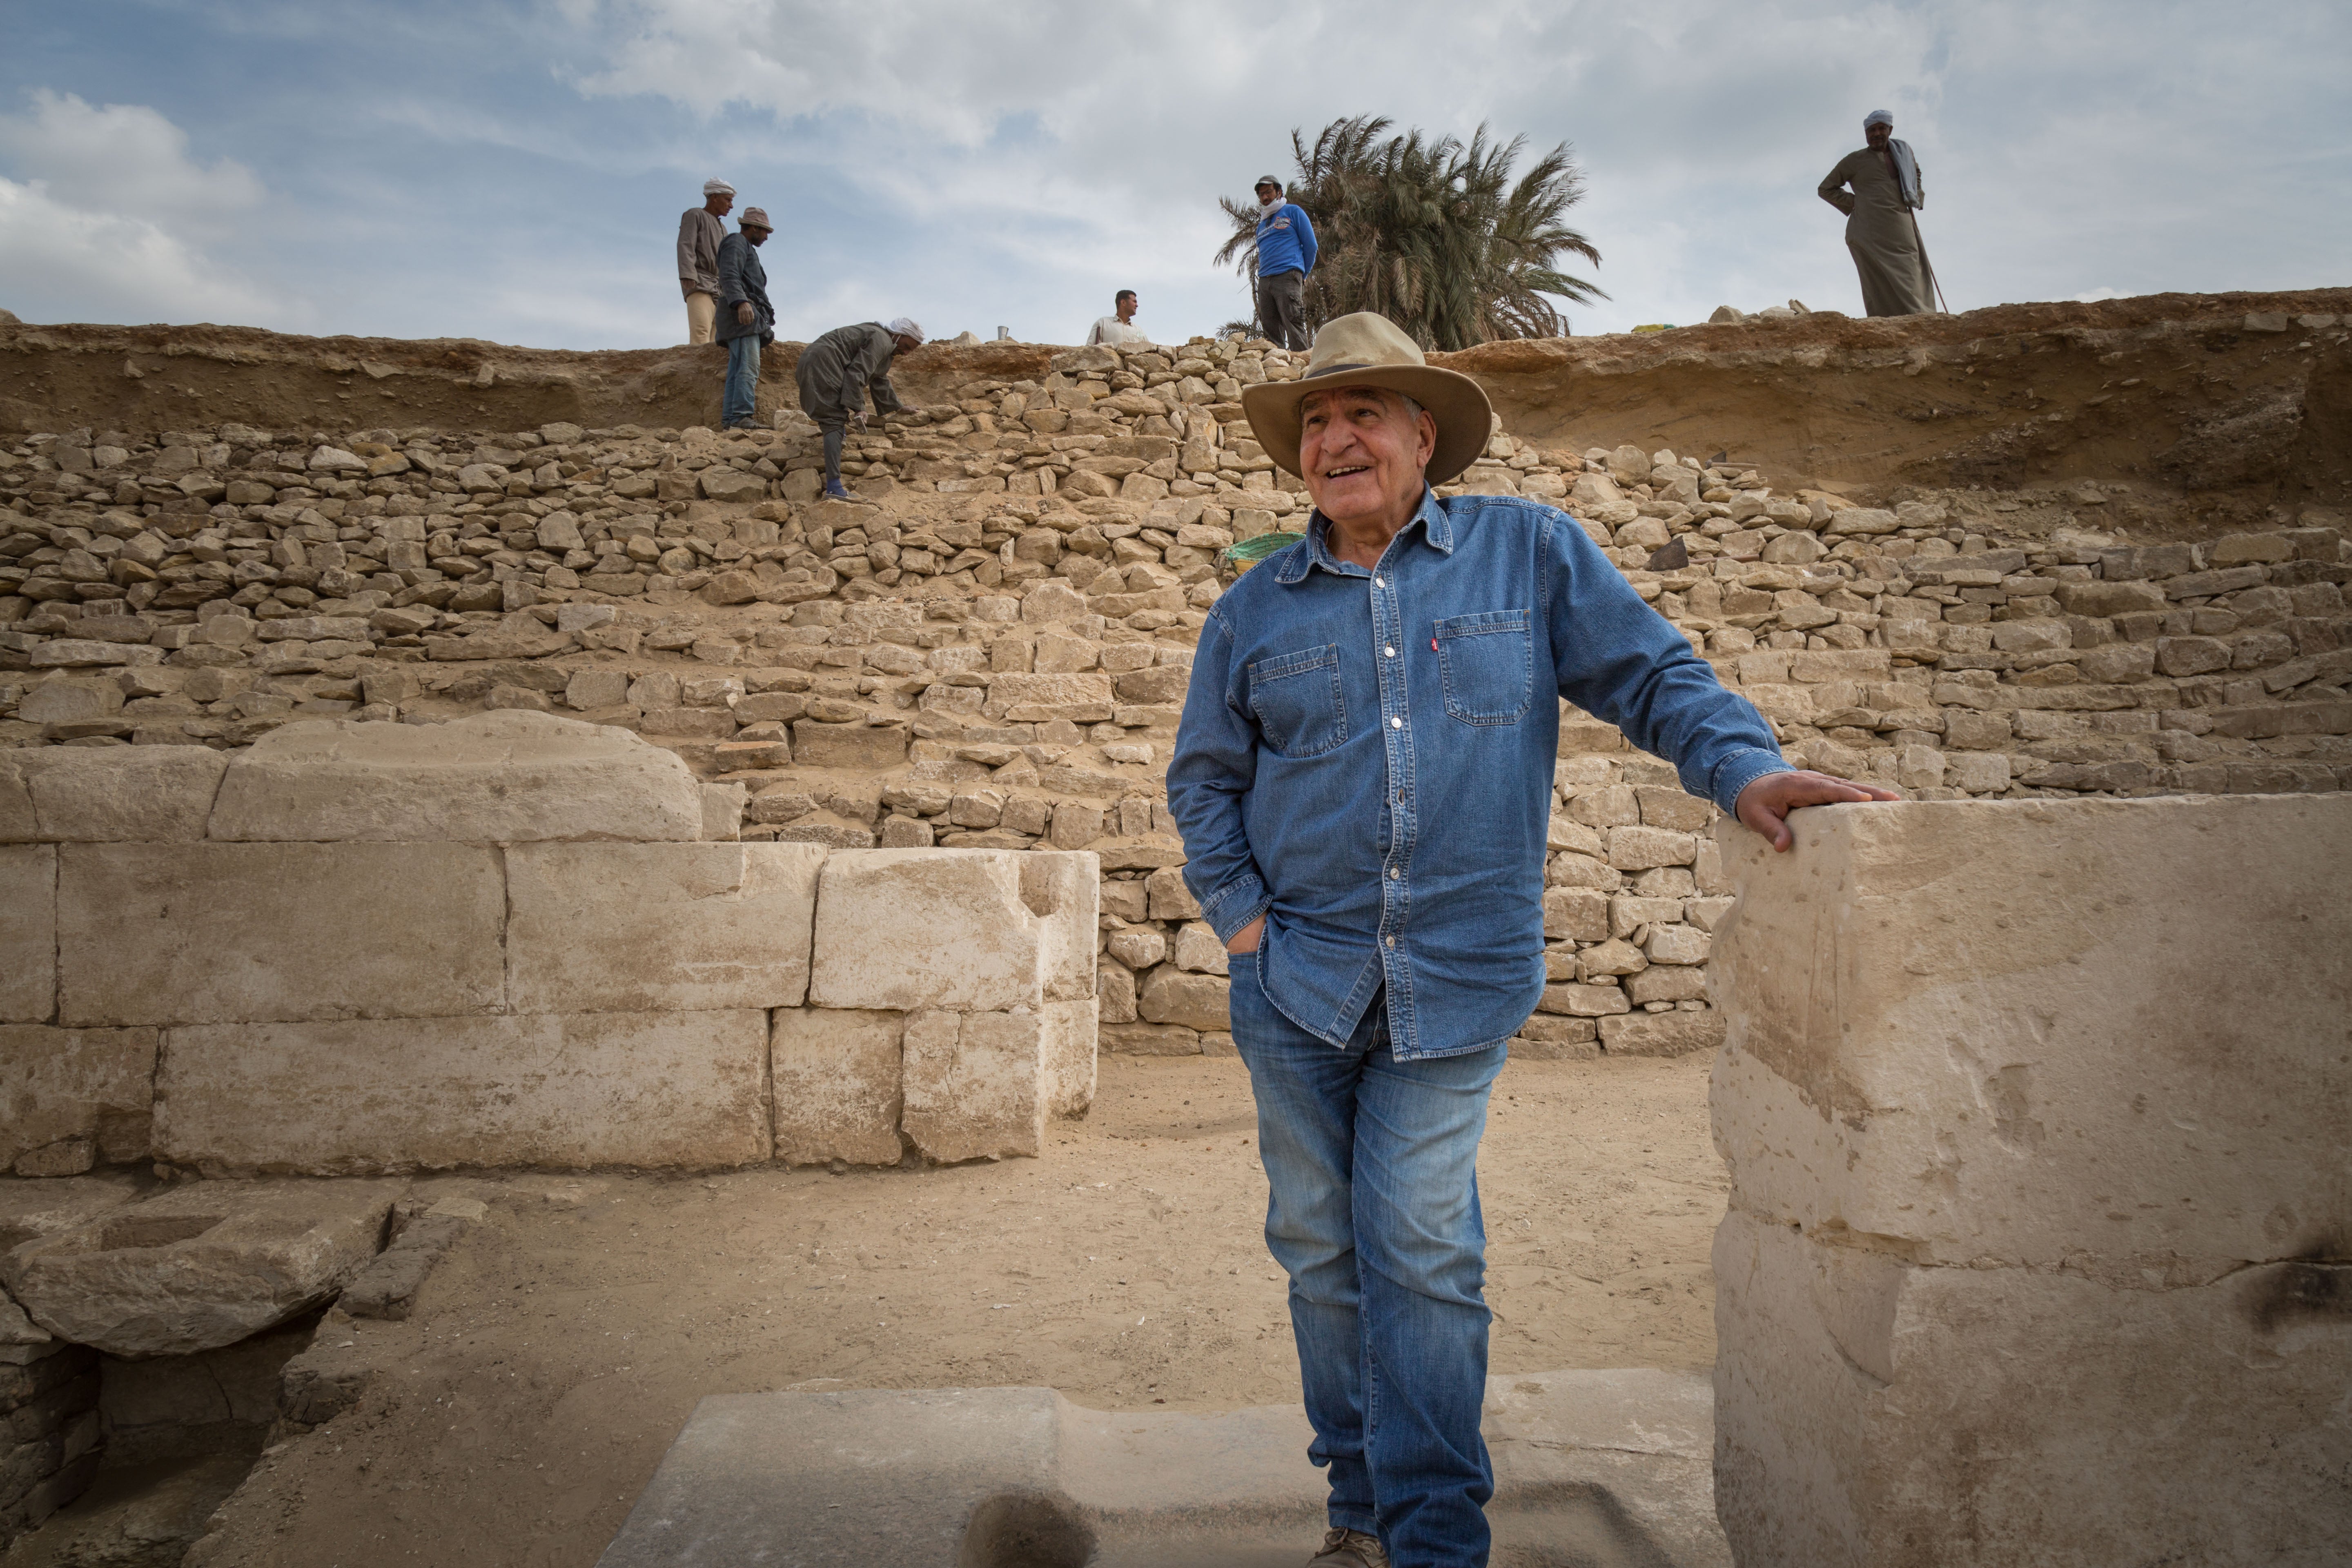 Zahi Hawass at the site where he and his team discovered evidence of Queen Neit